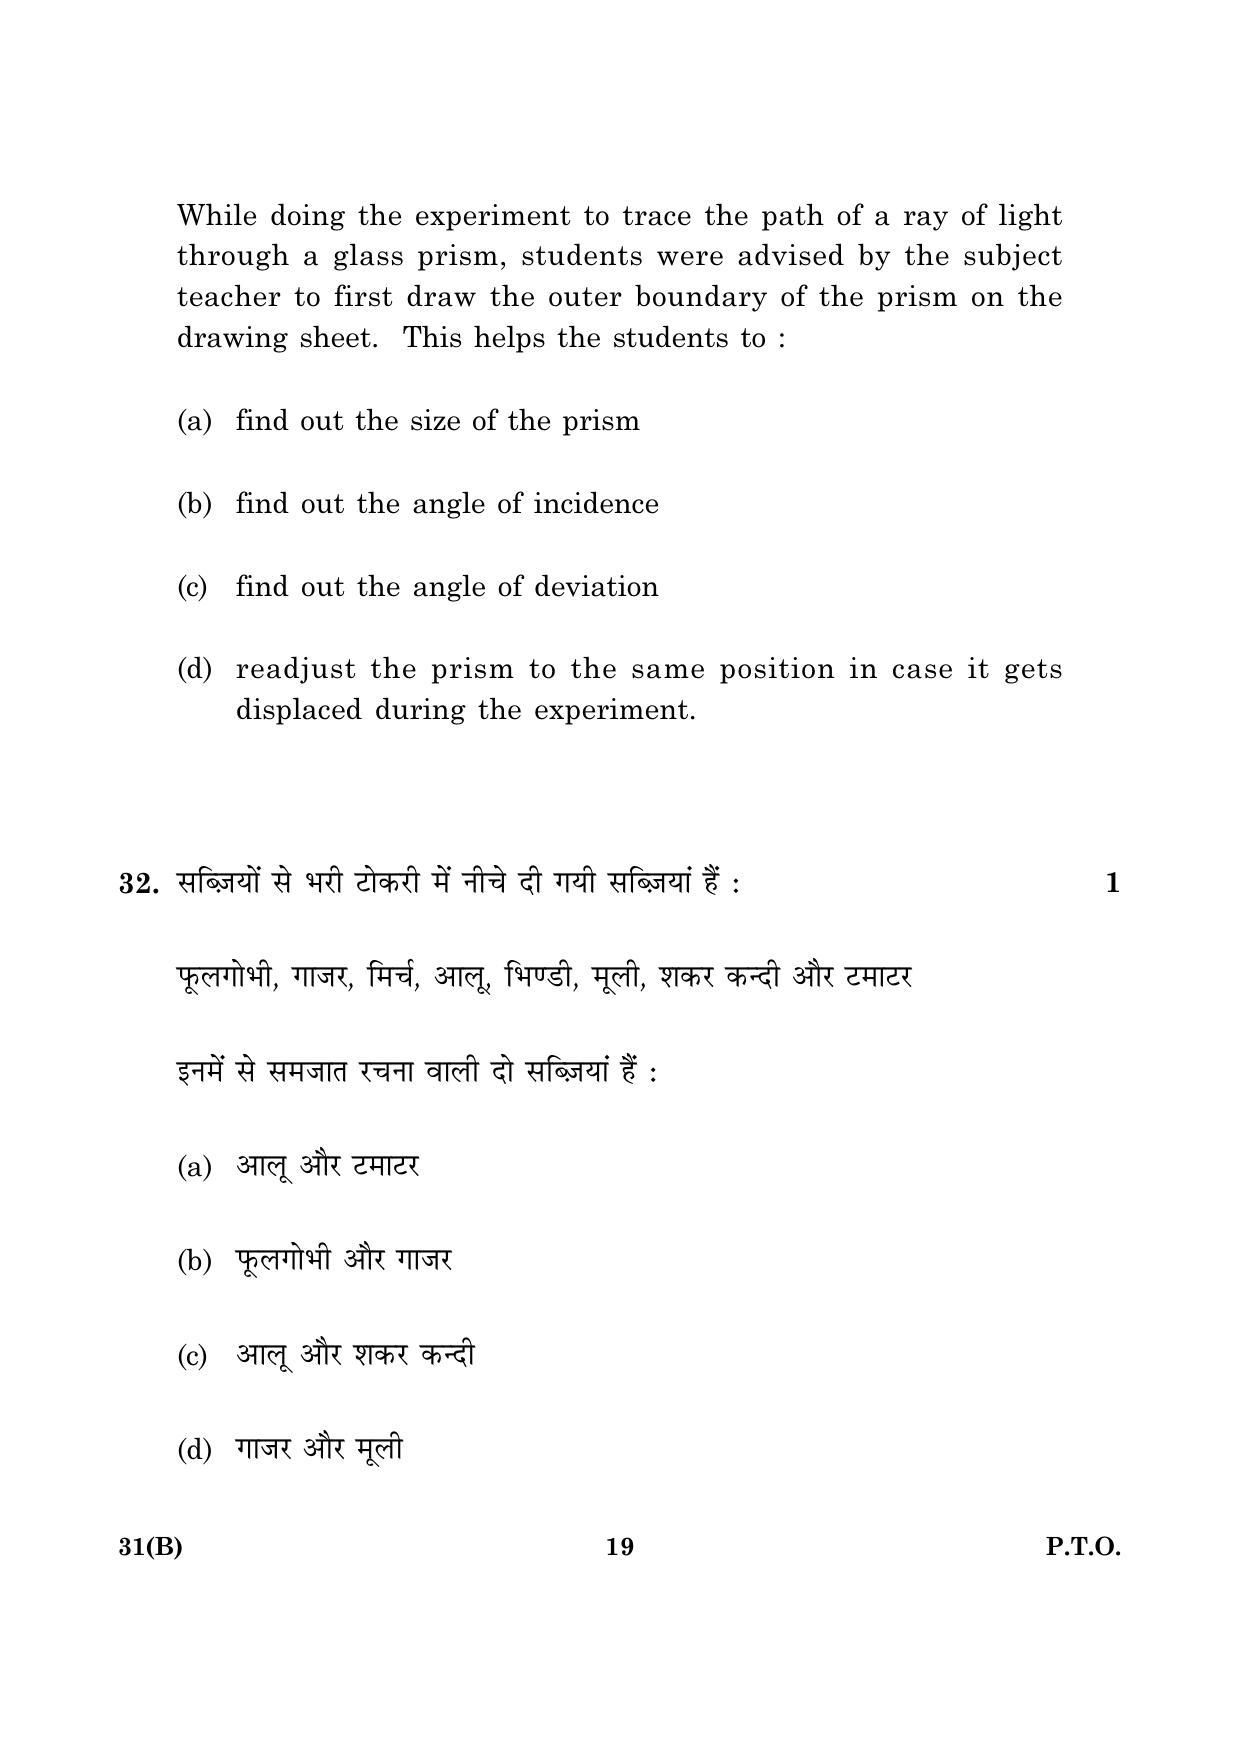 CBSE Class 10 031(B) Science 2016 Question Paper - Page 19